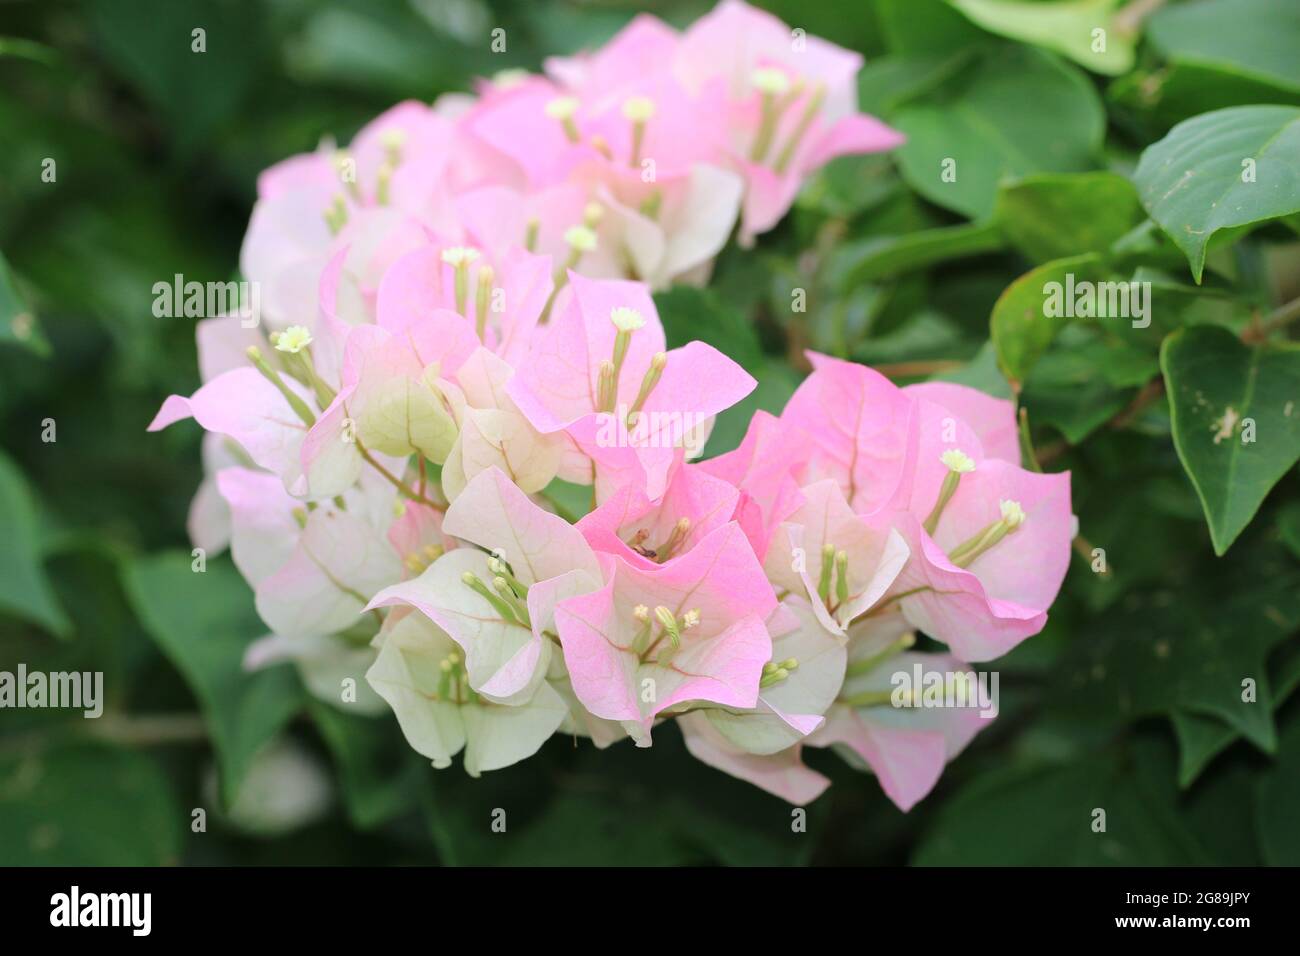 Beautiful paper flowers,amazing view of colorful paper flowers(bougainvillea,hairy bougainvillea) in the garden at summer Stock Photo